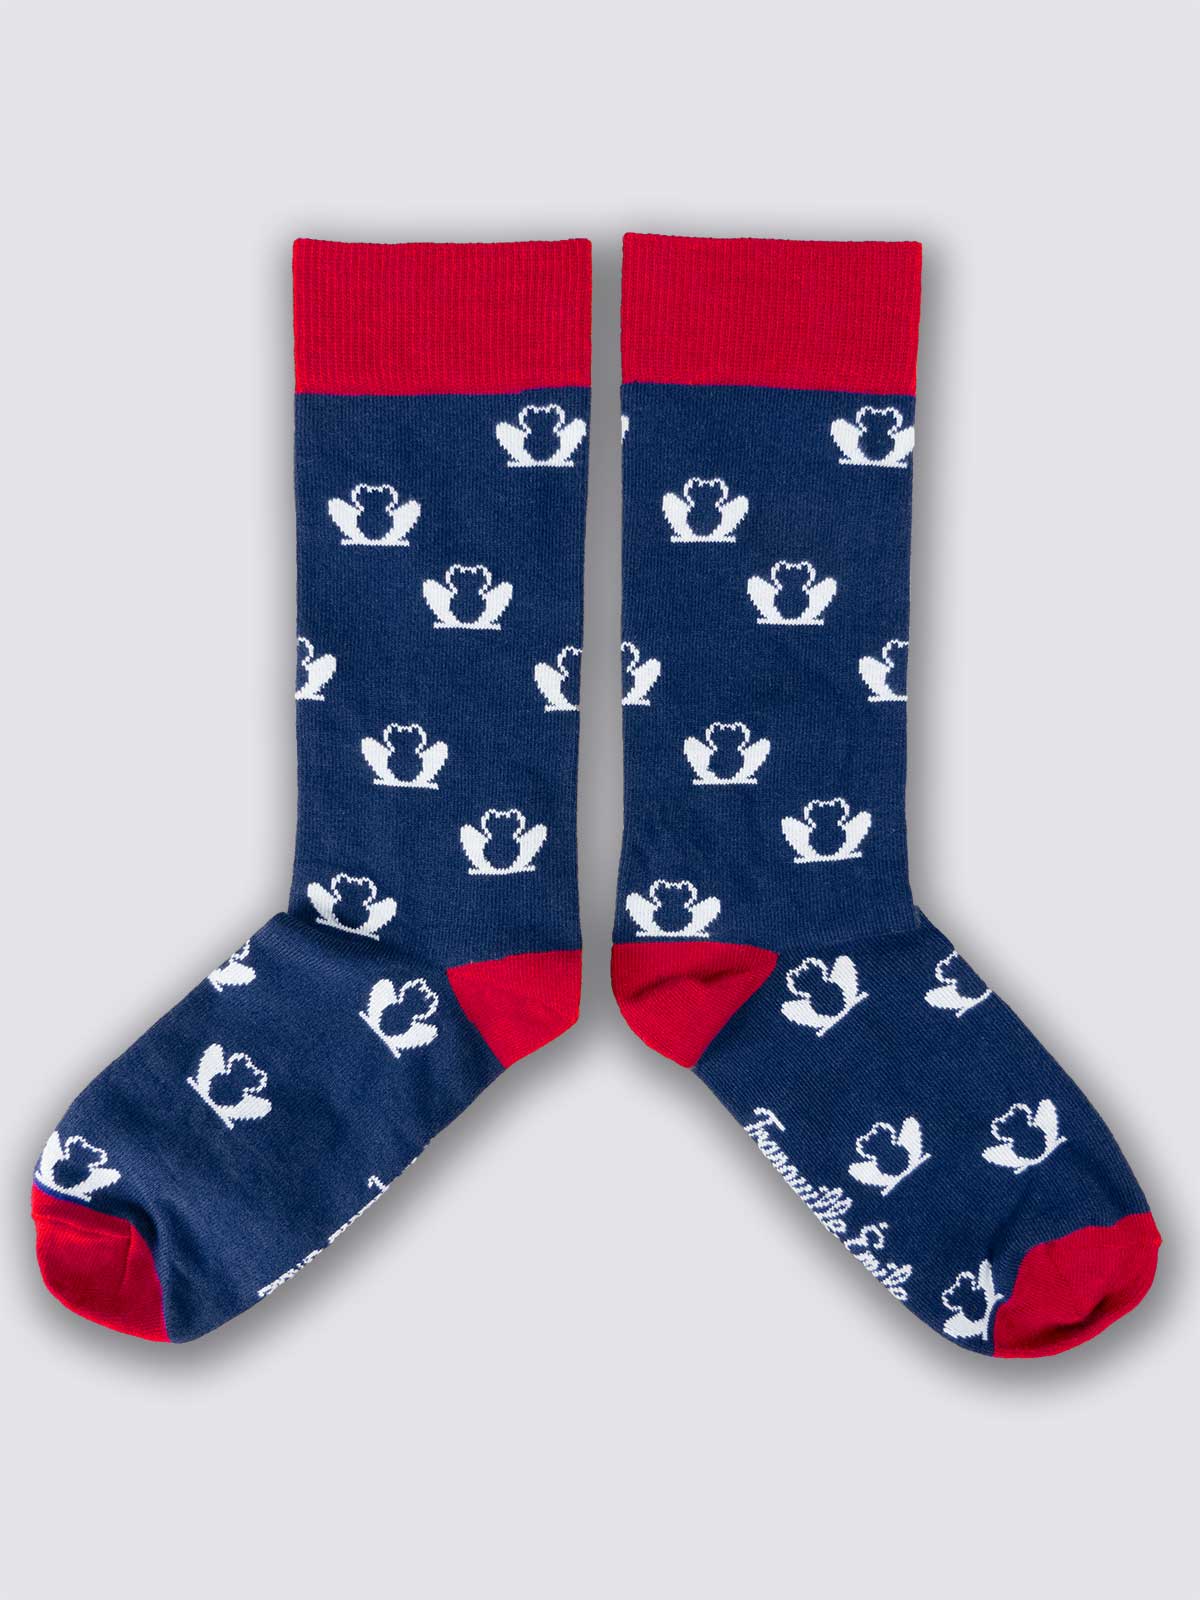 chaussettes-made-in-france-les-grenouilles-bleu-rouge-1